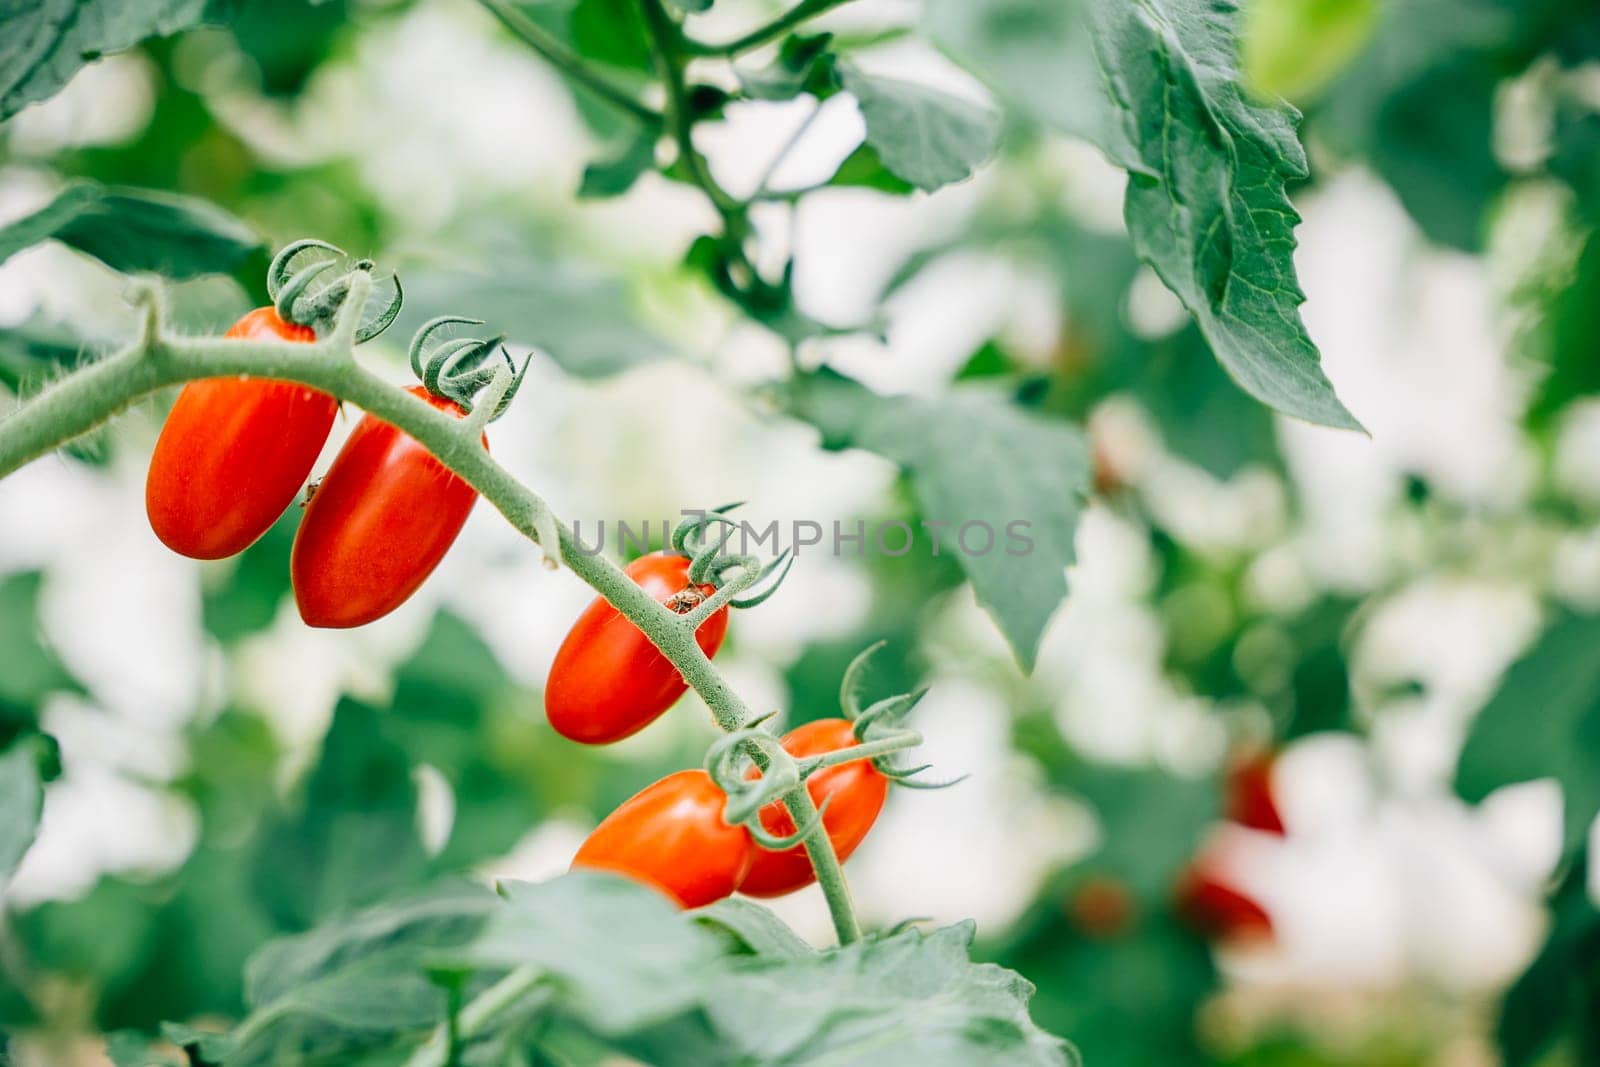 In a sunny greenhouse farmer's hands carefully hold a branch of cherry tomatoes. Quality harvest shows meticulous growth care vibrant red fruits symbolizing nature's abundance outdoors.